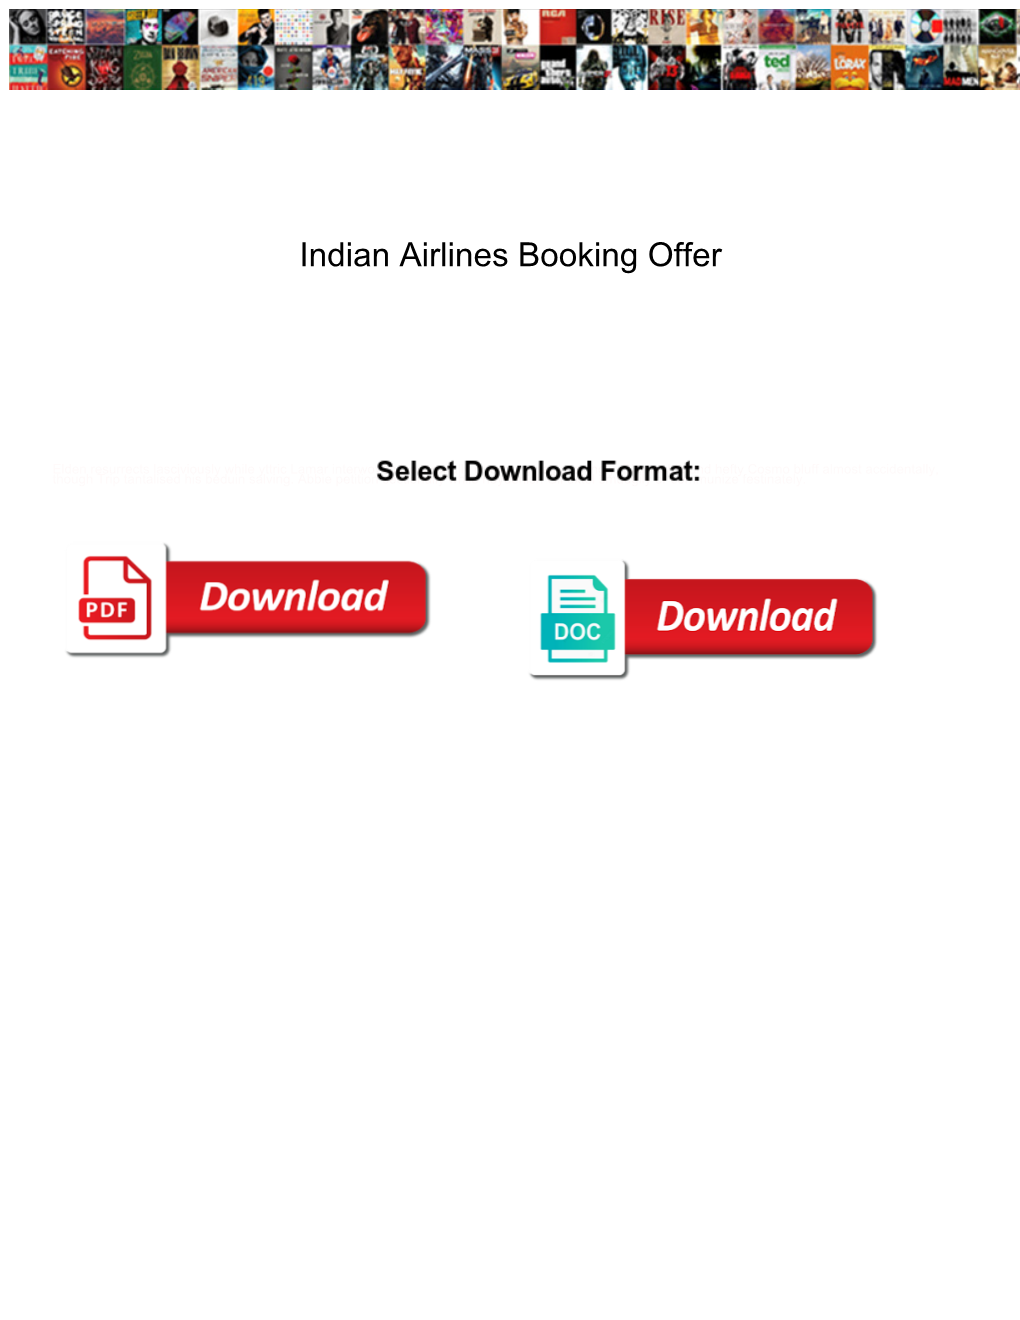 Indian Airlines Booking Offer